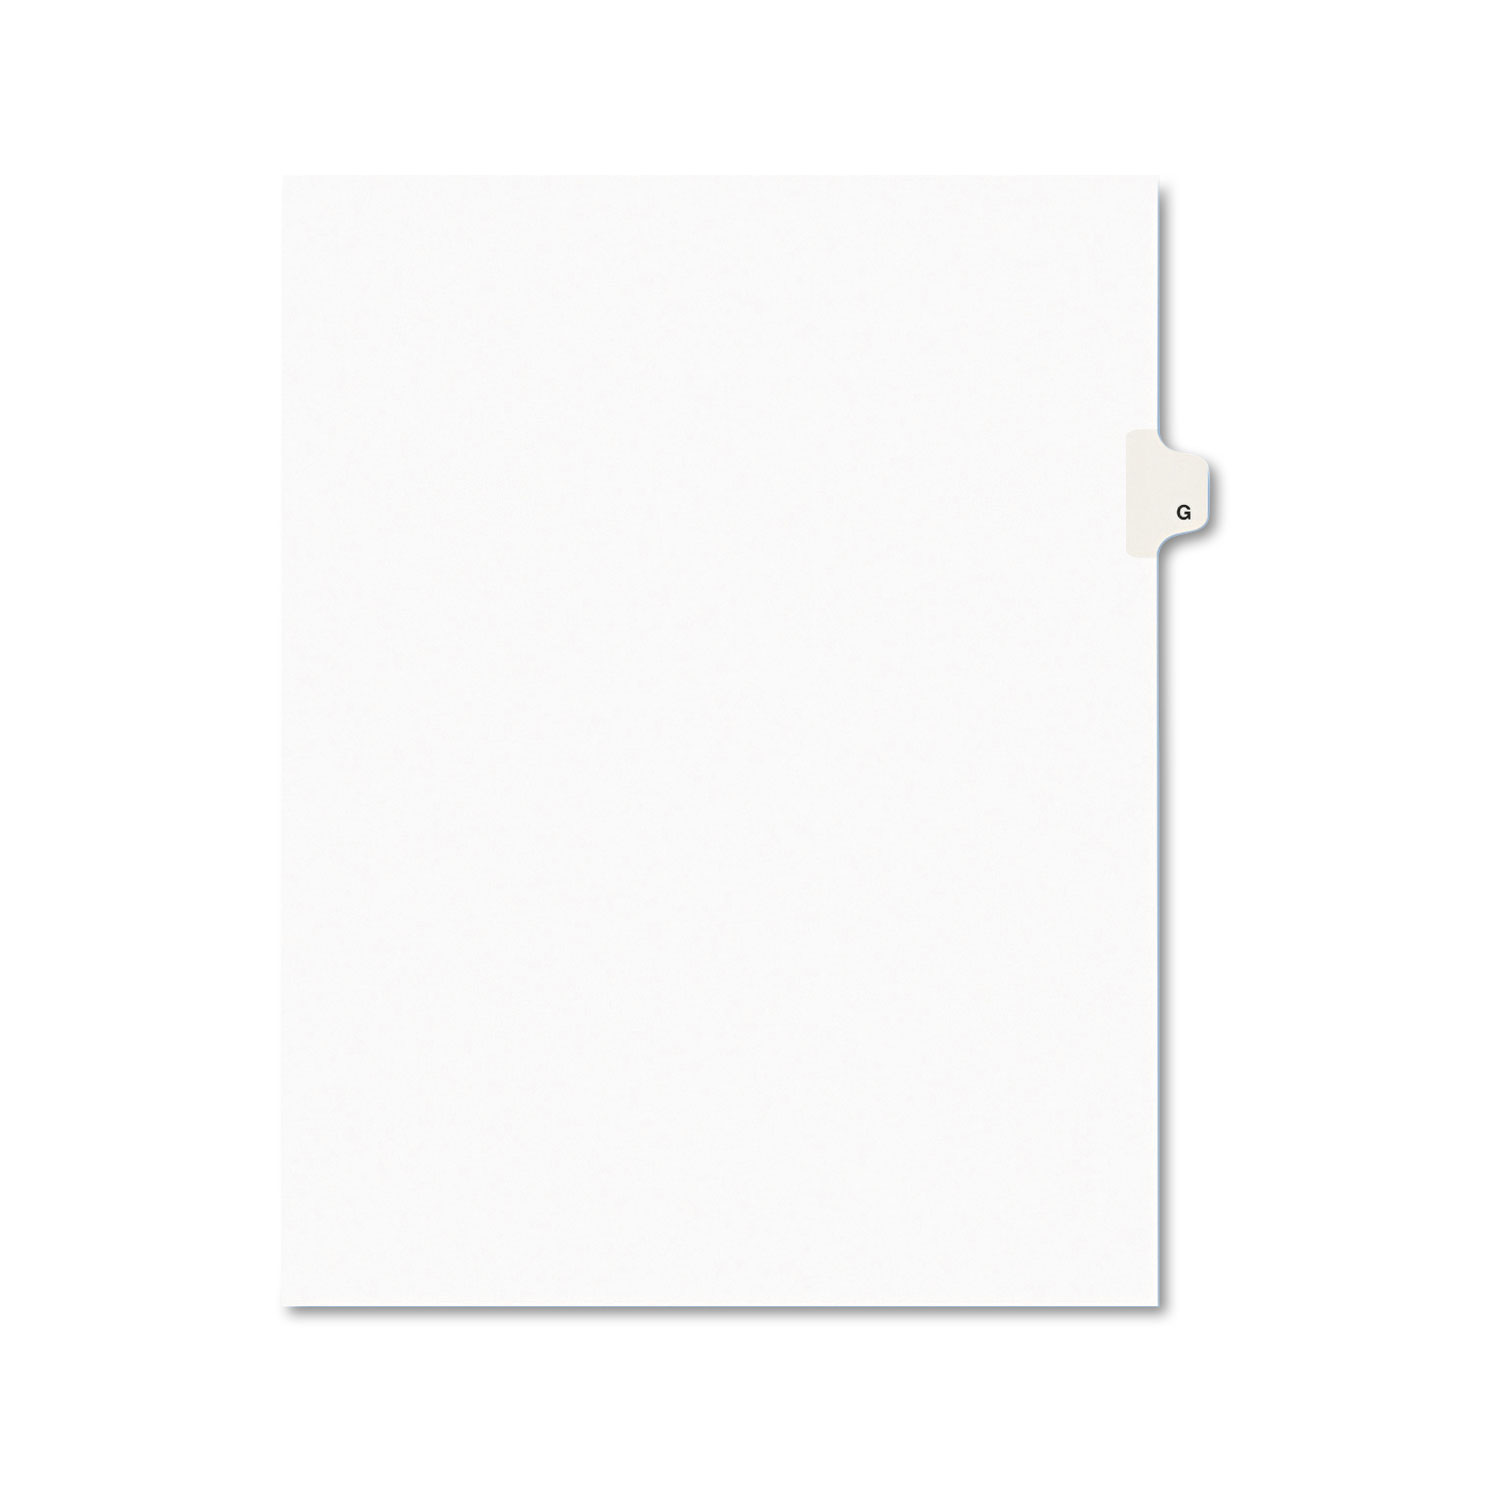  Avery 01407 Preprinted Legal Exhibit Side Tab Index Dividers, Avery Style, 26-Tab, G, 11 x 8.5, White, 25/Pack (AVE01407) 